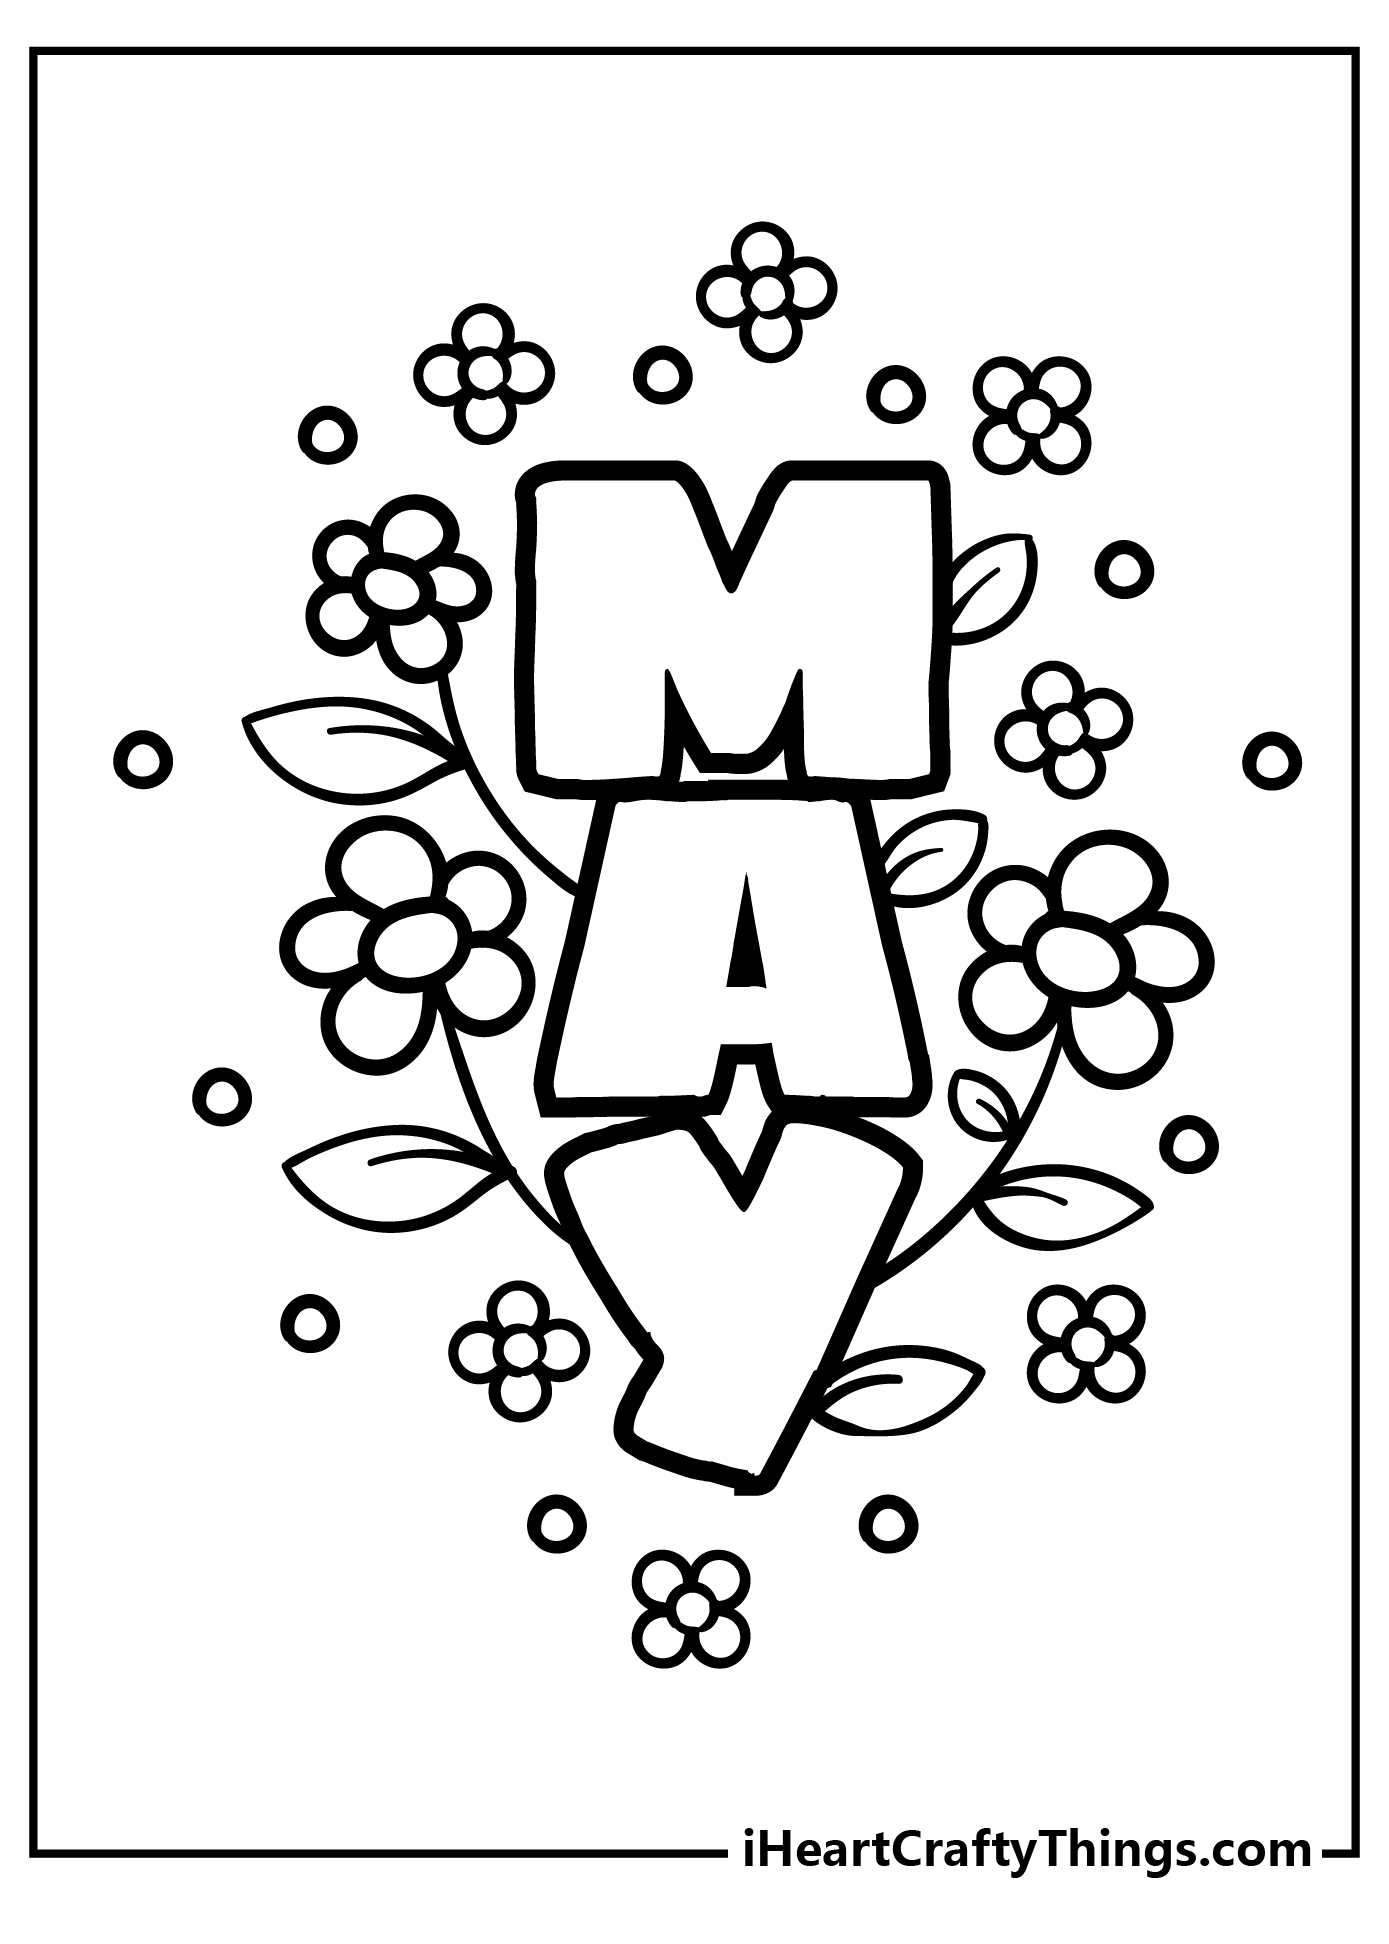 May Coloring Book for kids free printable